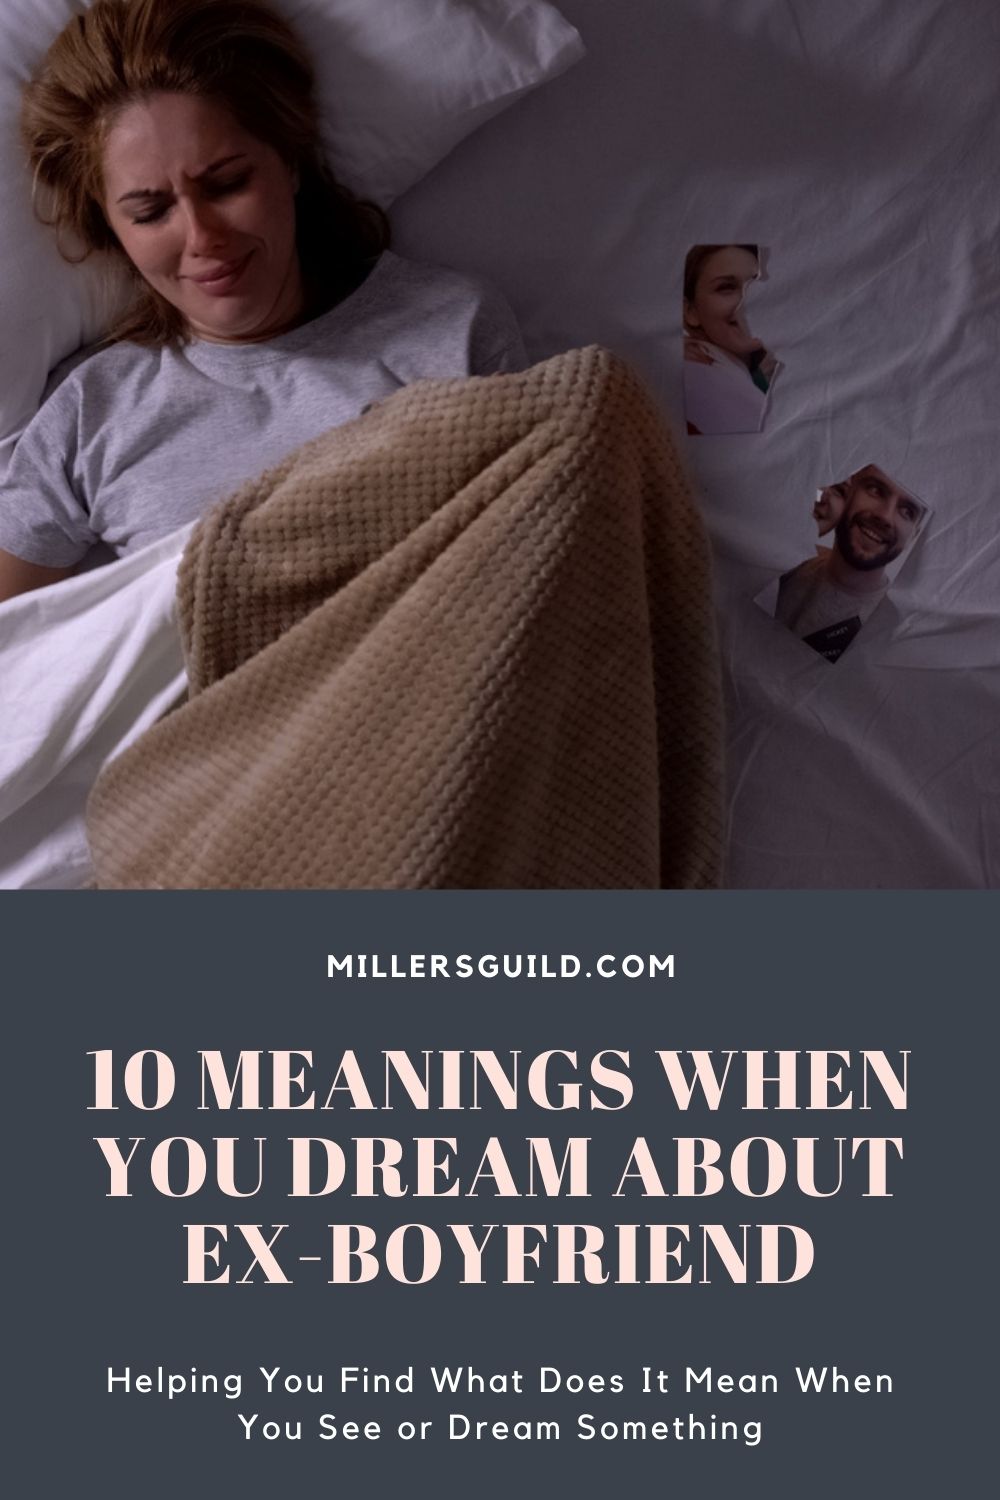 10 Meanings When You Dream About Ex-Boyfriend 2